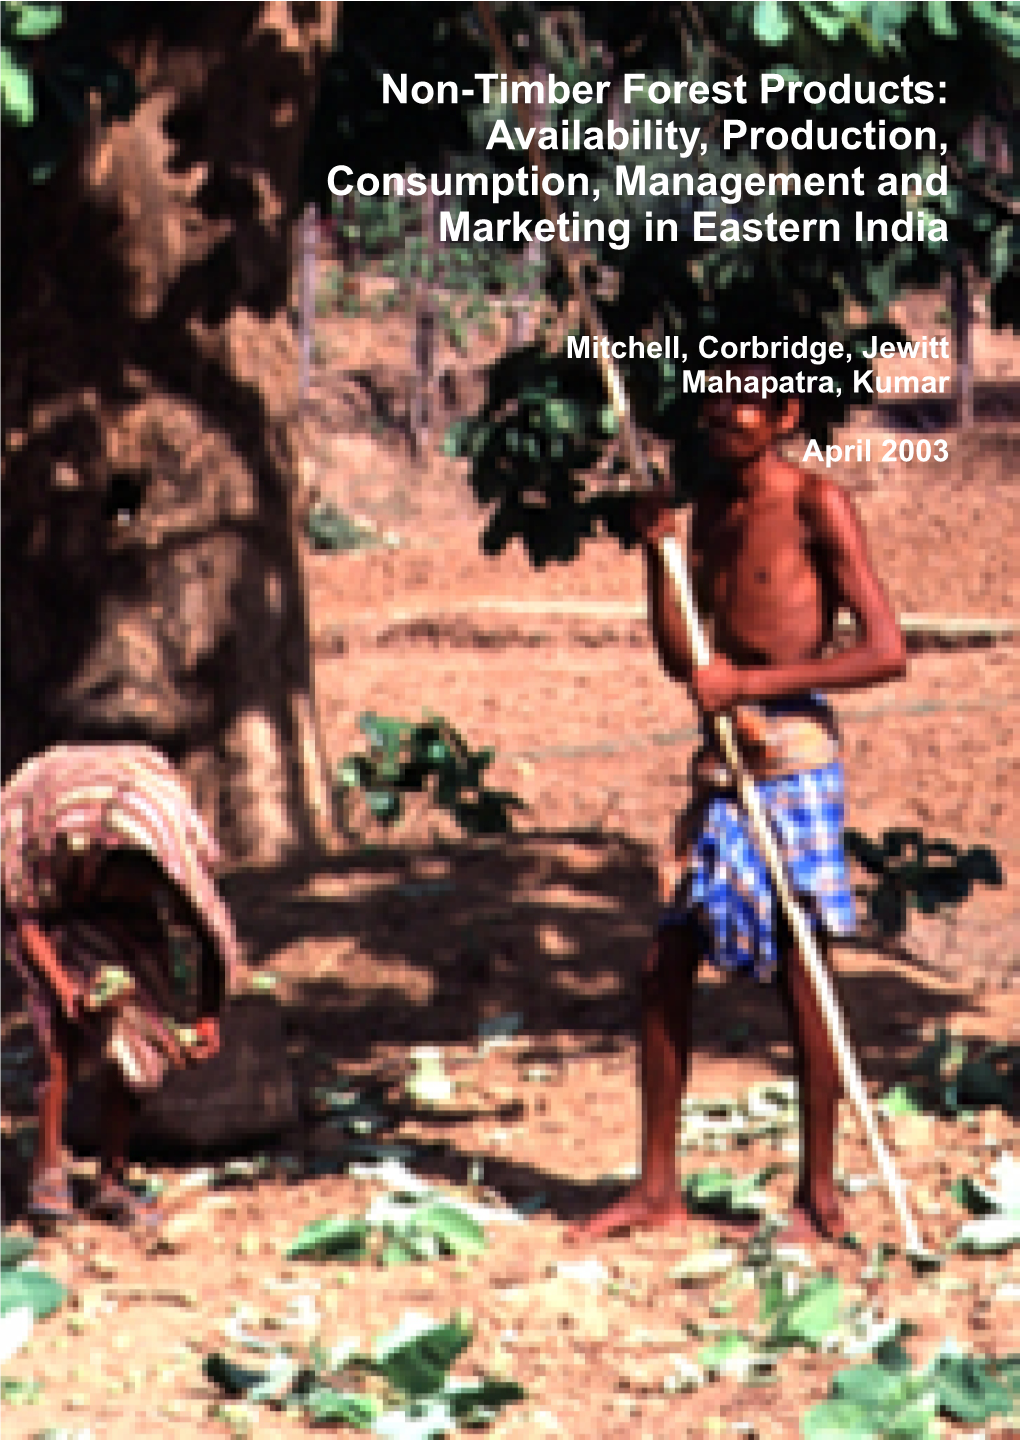 Non-Timber Forest Products: Availability, Production, Consumption, Management and Marketing in Eastern India